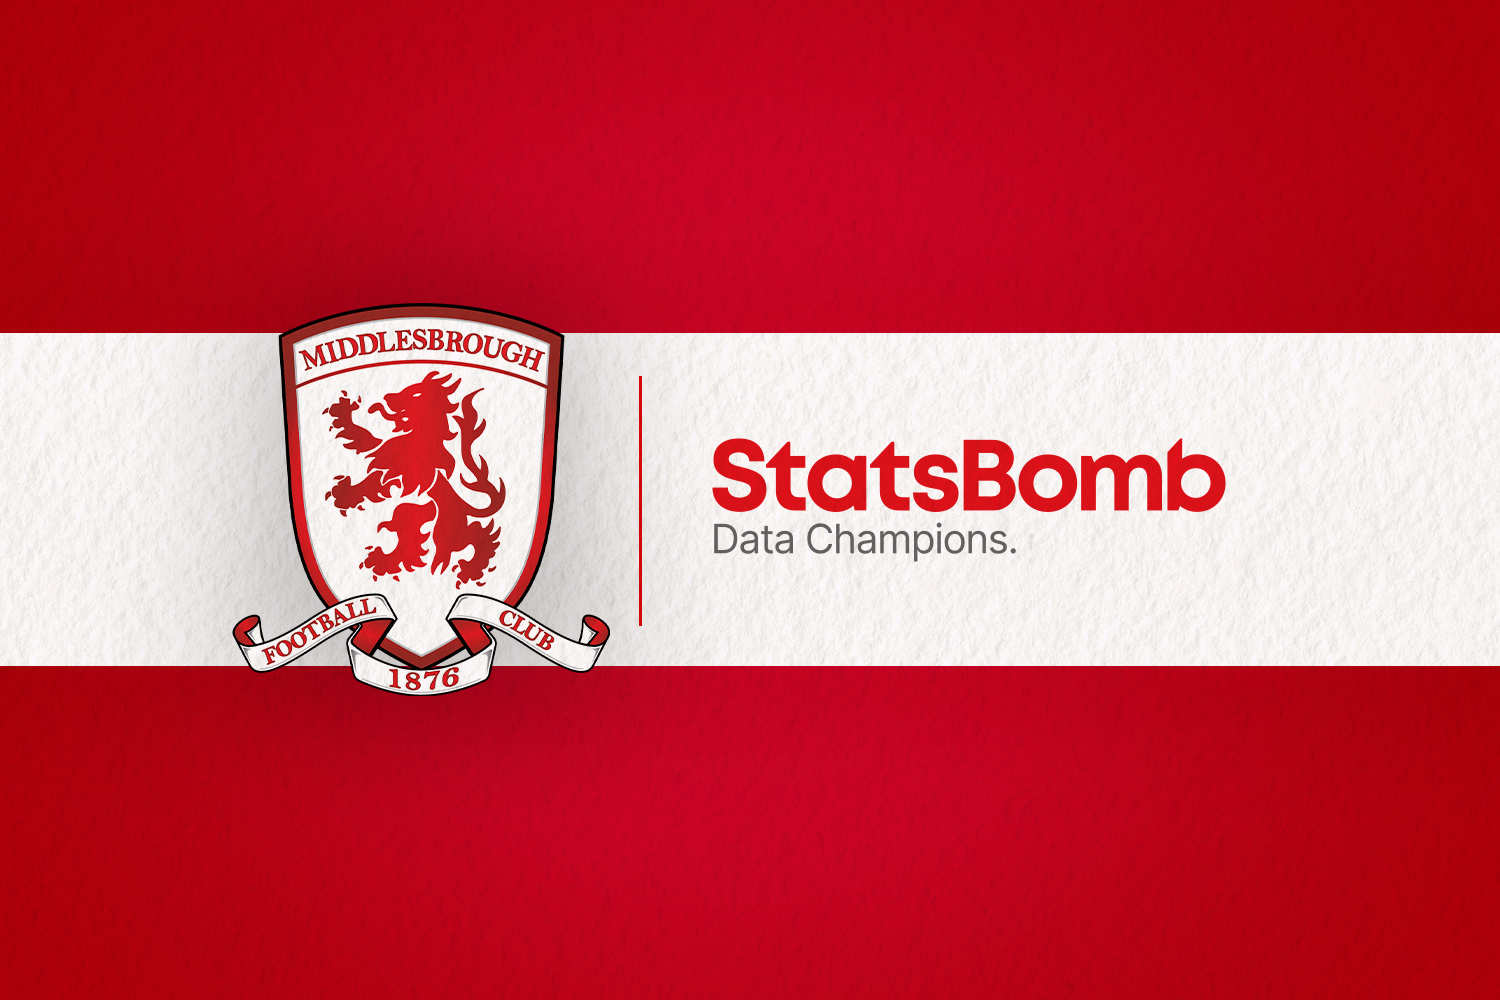 StatsBomb Expand Championship Customer Base With Middlesbrough FC Agreement